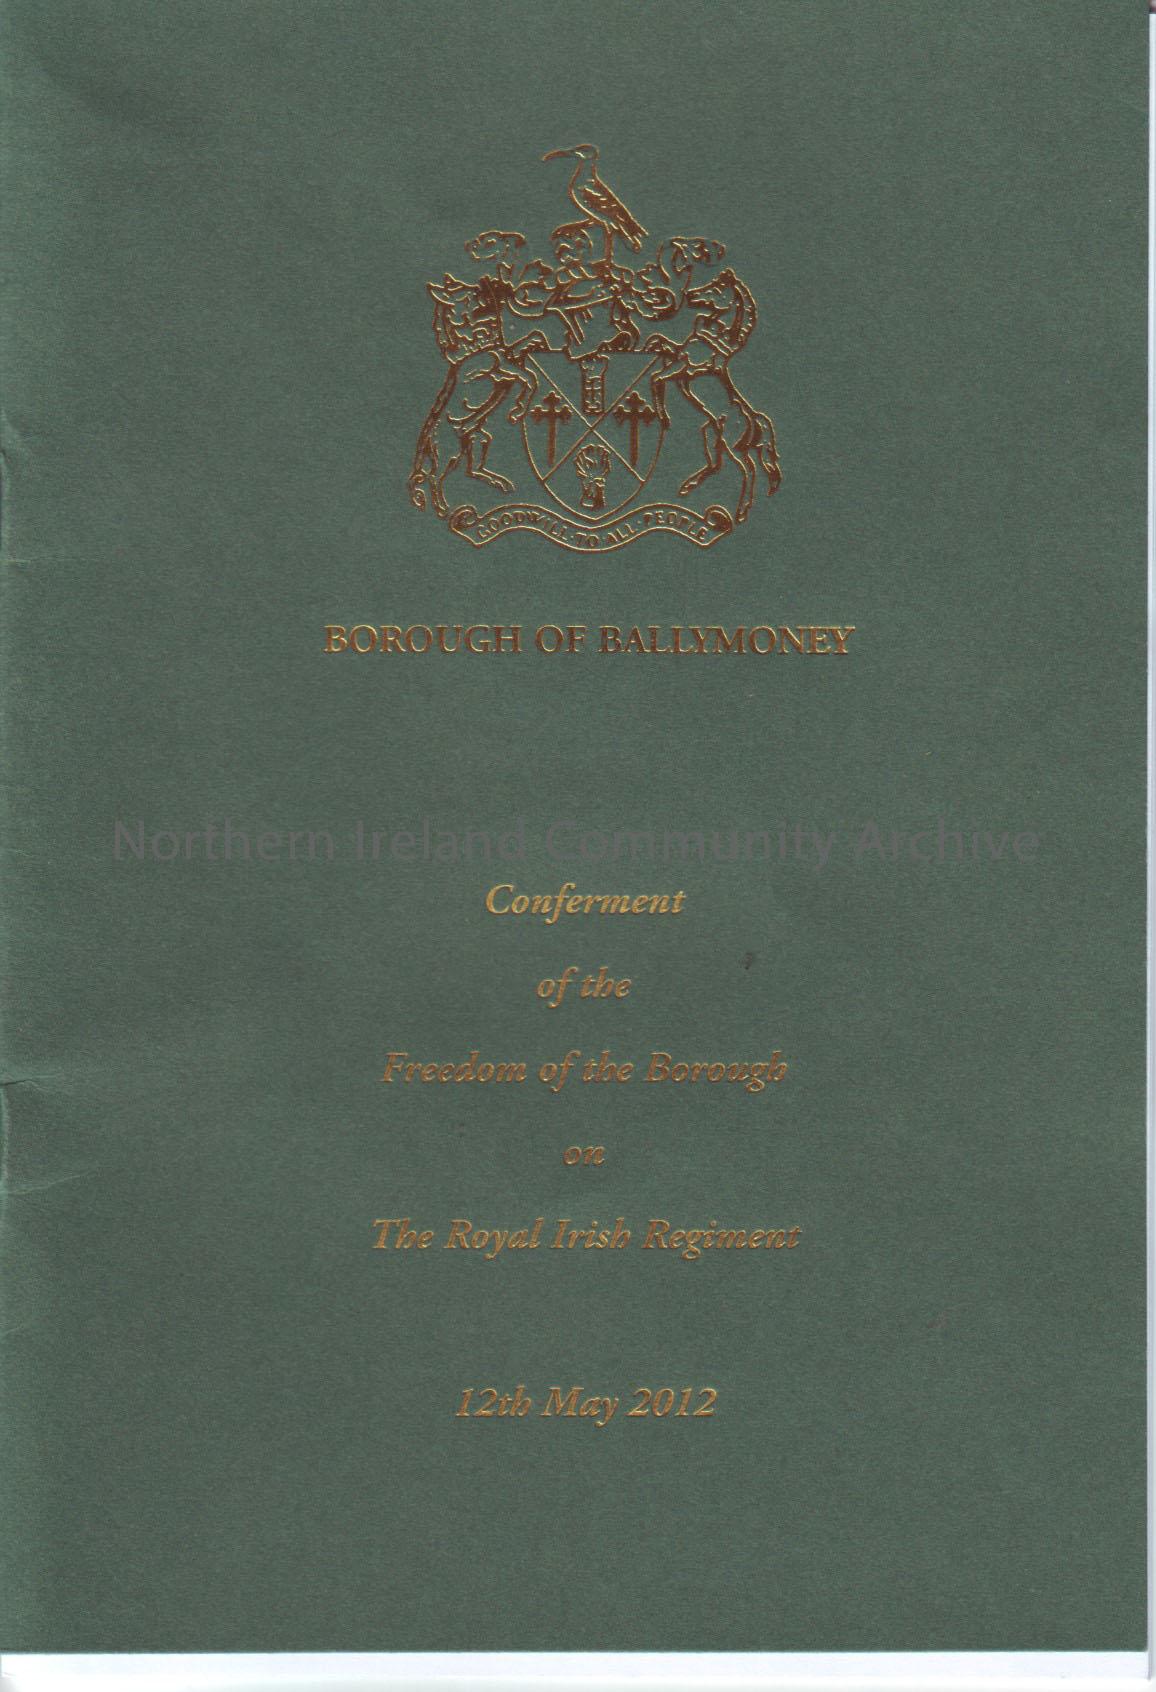 Programme, menu, tickets and car park sticker for the ‘Conferment of the freedom of the Borough on The Royal Irish Regiment, 12th May 2012. – 2011.608